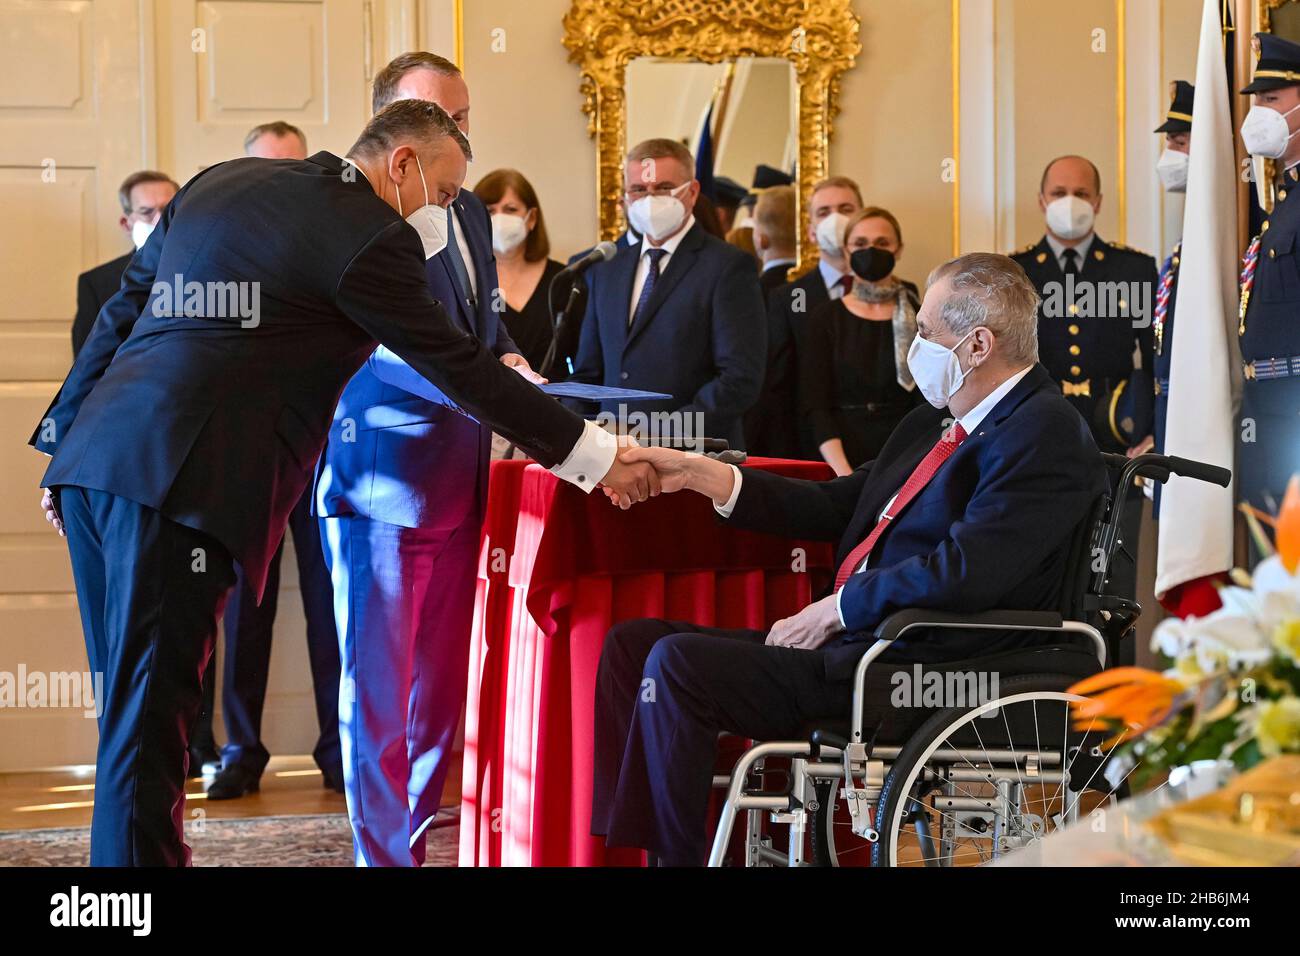 Lany, Czech Republic. 17th Dec, 2021. Czech President Milos Zeman, right, appointed ministers of new Czech cabinet of Petr Fiala, comprising five parties - ODS, KDU-CSL, TOP 09, Pirates and STAN, on December 17, 2021, at the Lany Chateau, Czech Republic. On the photo is seen new Industry and Trade Minister Jozef Sikela (for STAN), left. Credit: Vit Simanek/CTK Photo/Alamy Live News Stock Photo